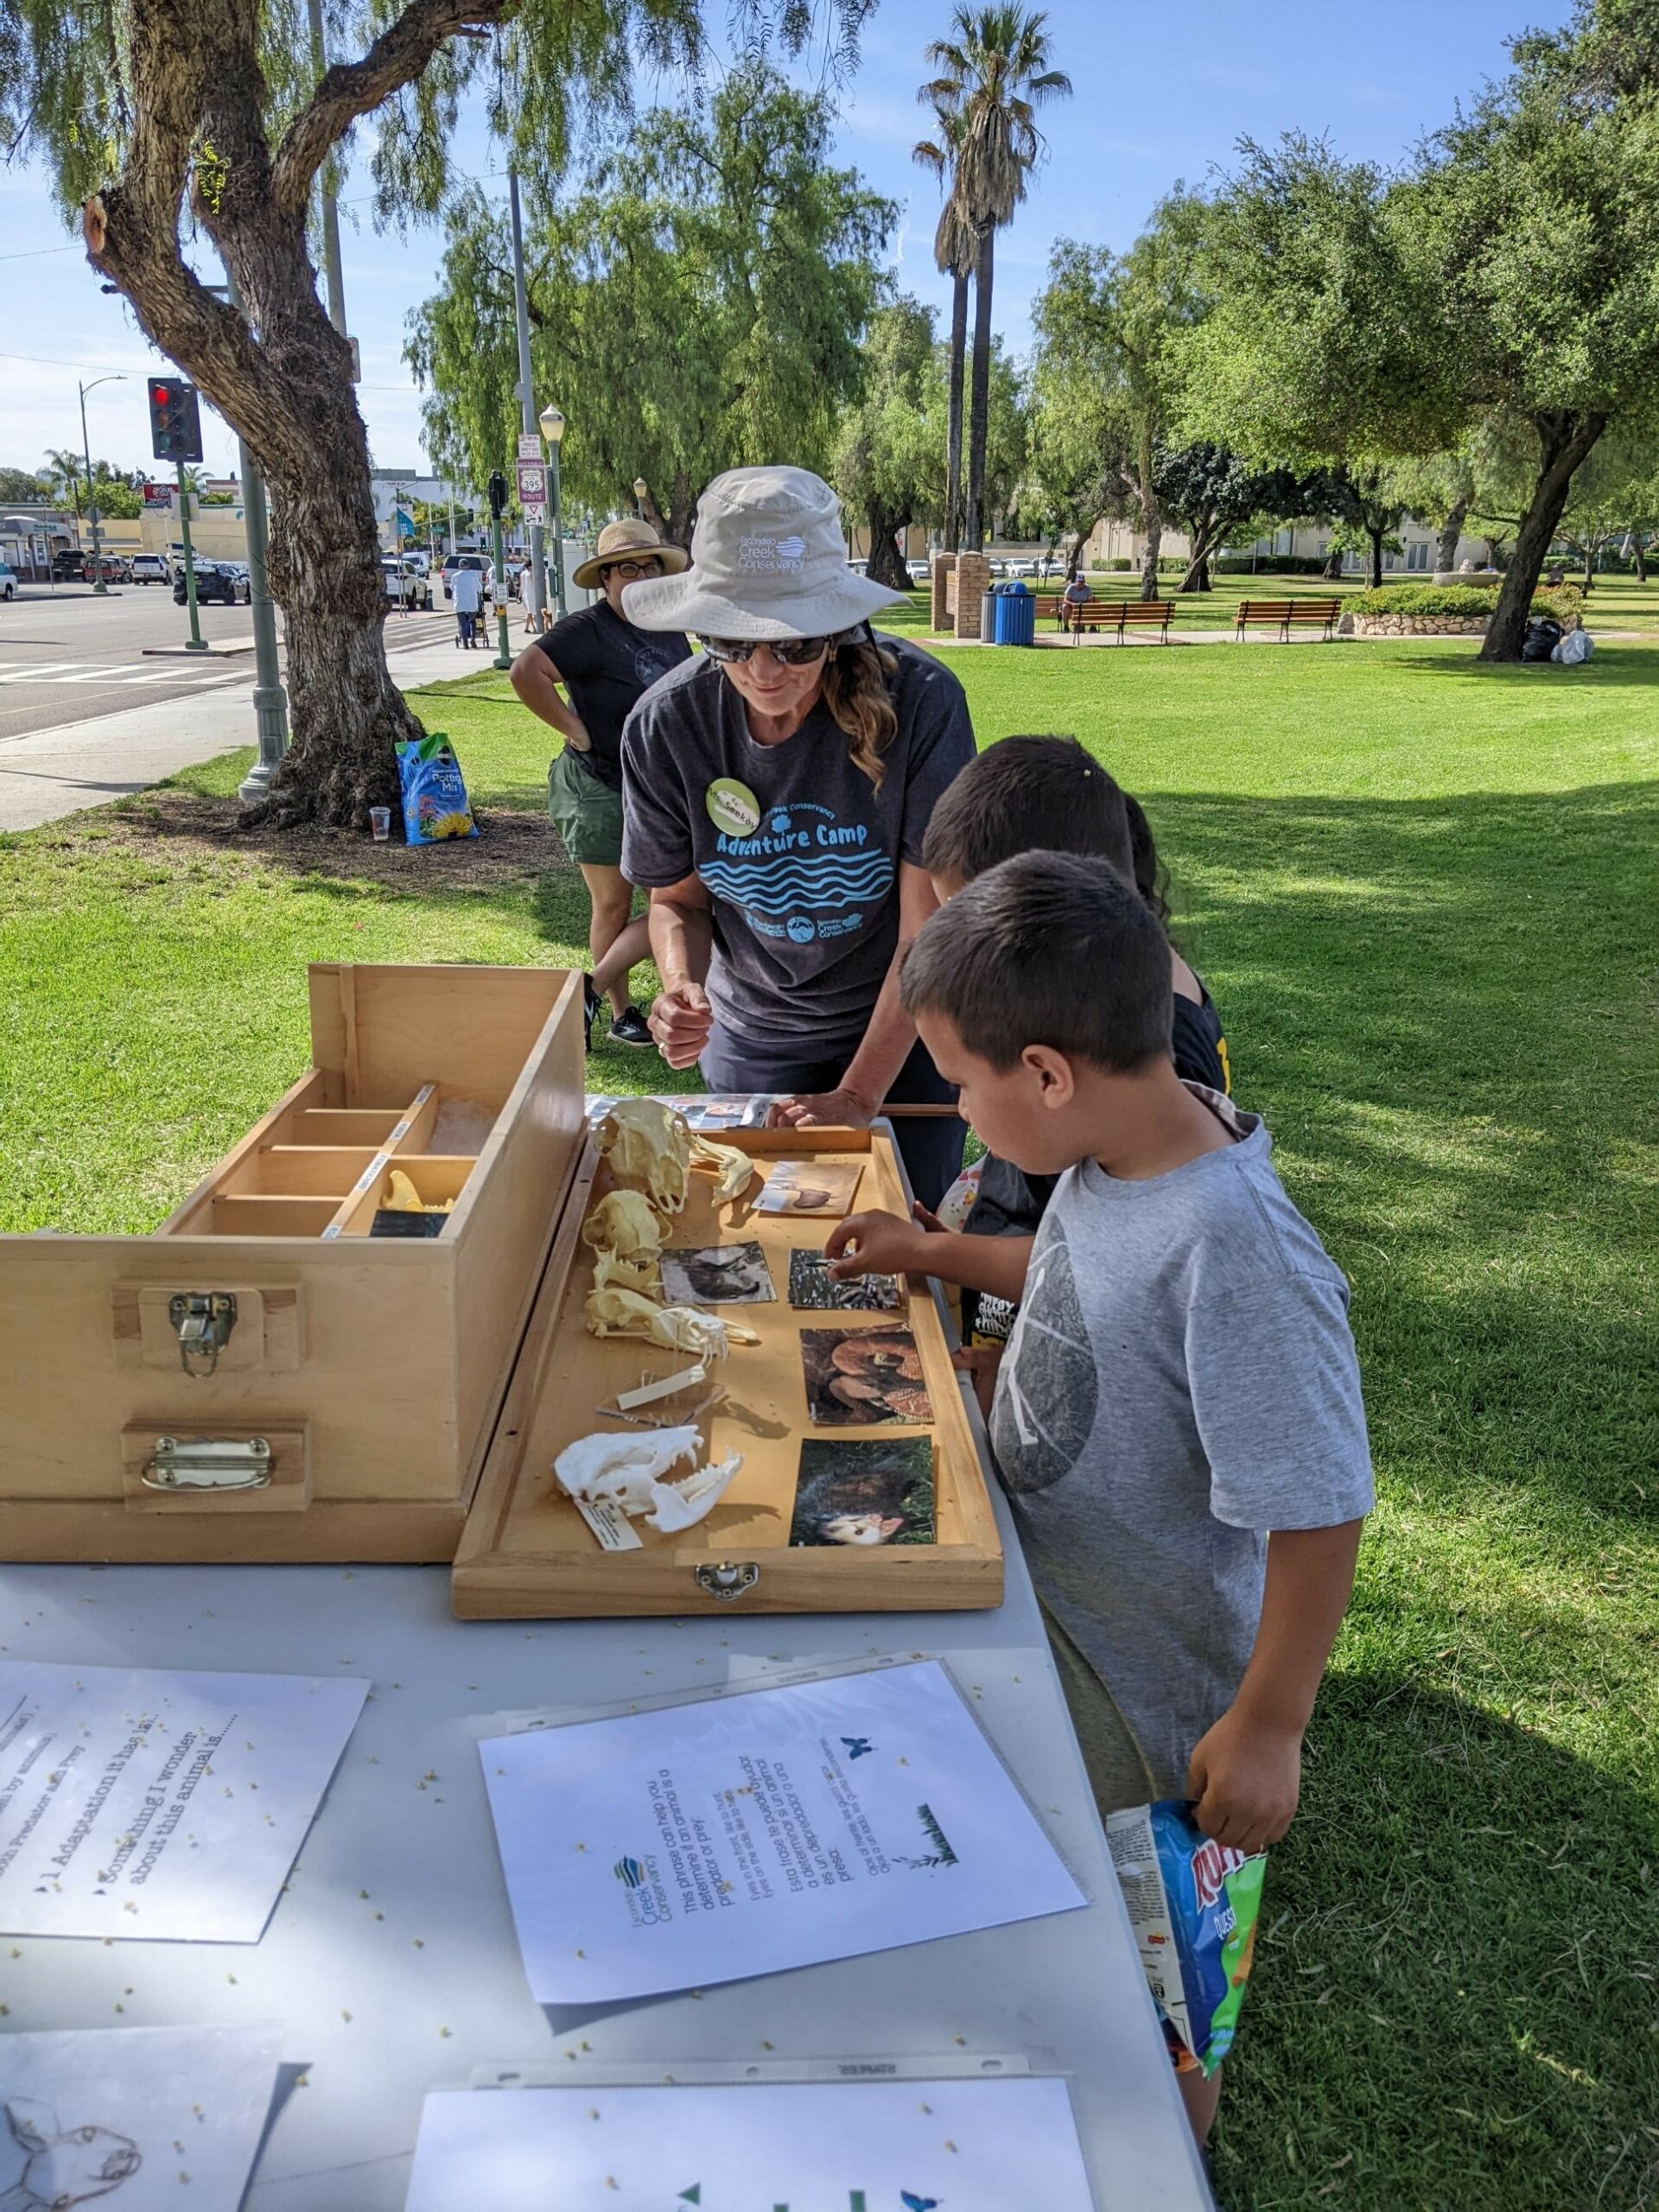 Elementary students look at animal skulls on a table in the park.